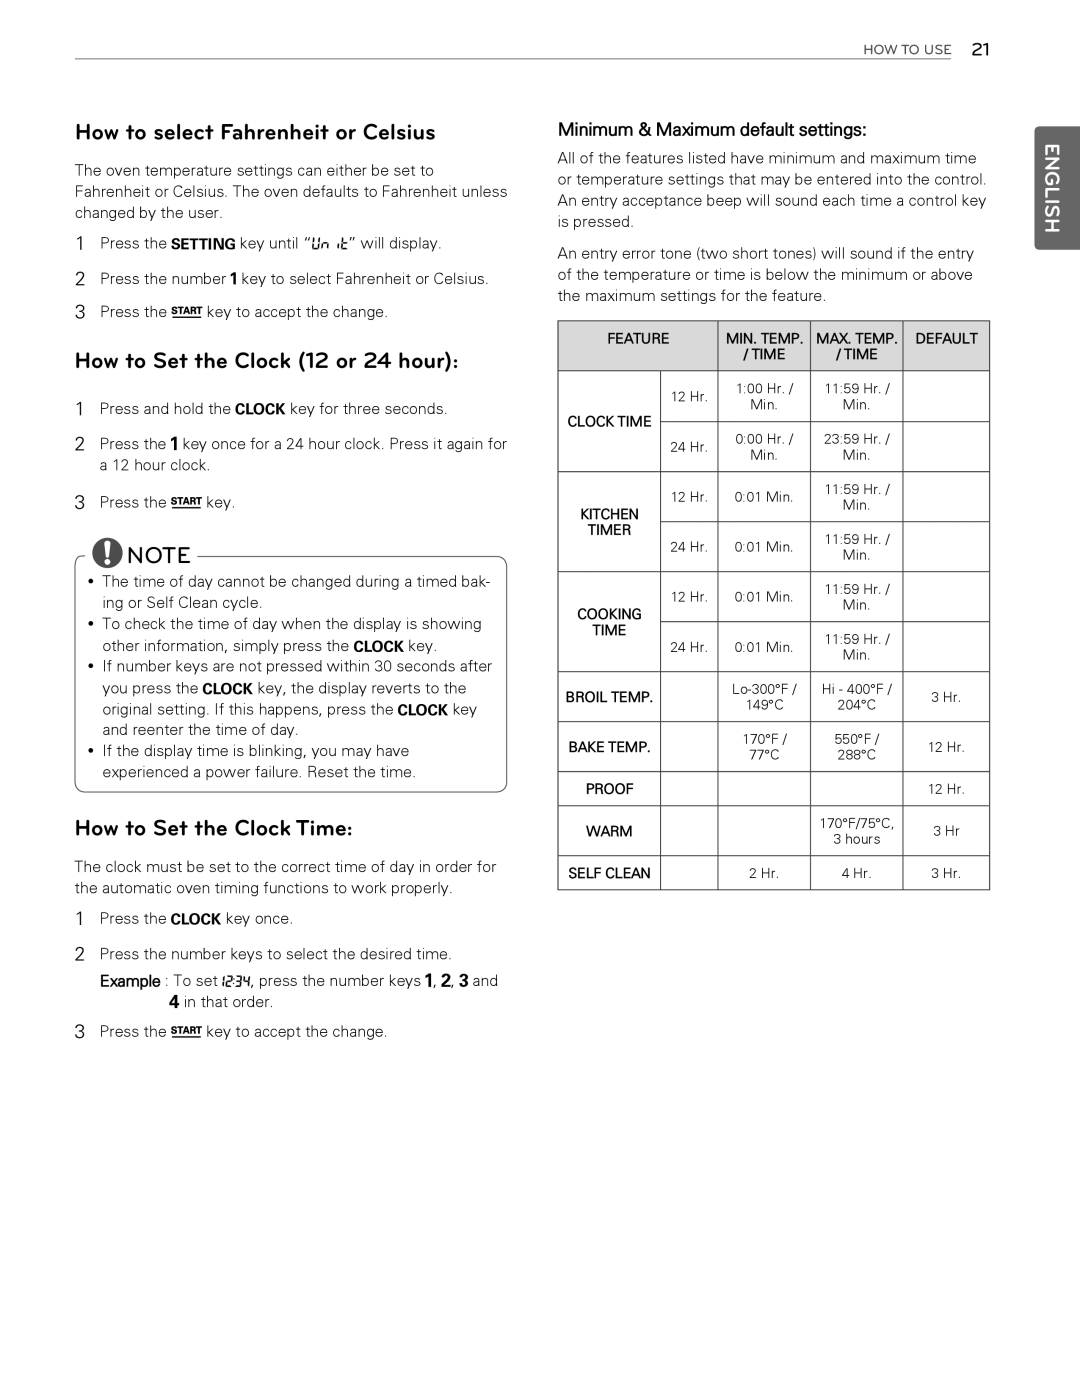 LG Electronics LDG3015ST, LDG3016ST How to select Fahrenheit or Celsius, How to Set the Clock 12 or 24 hour, English 